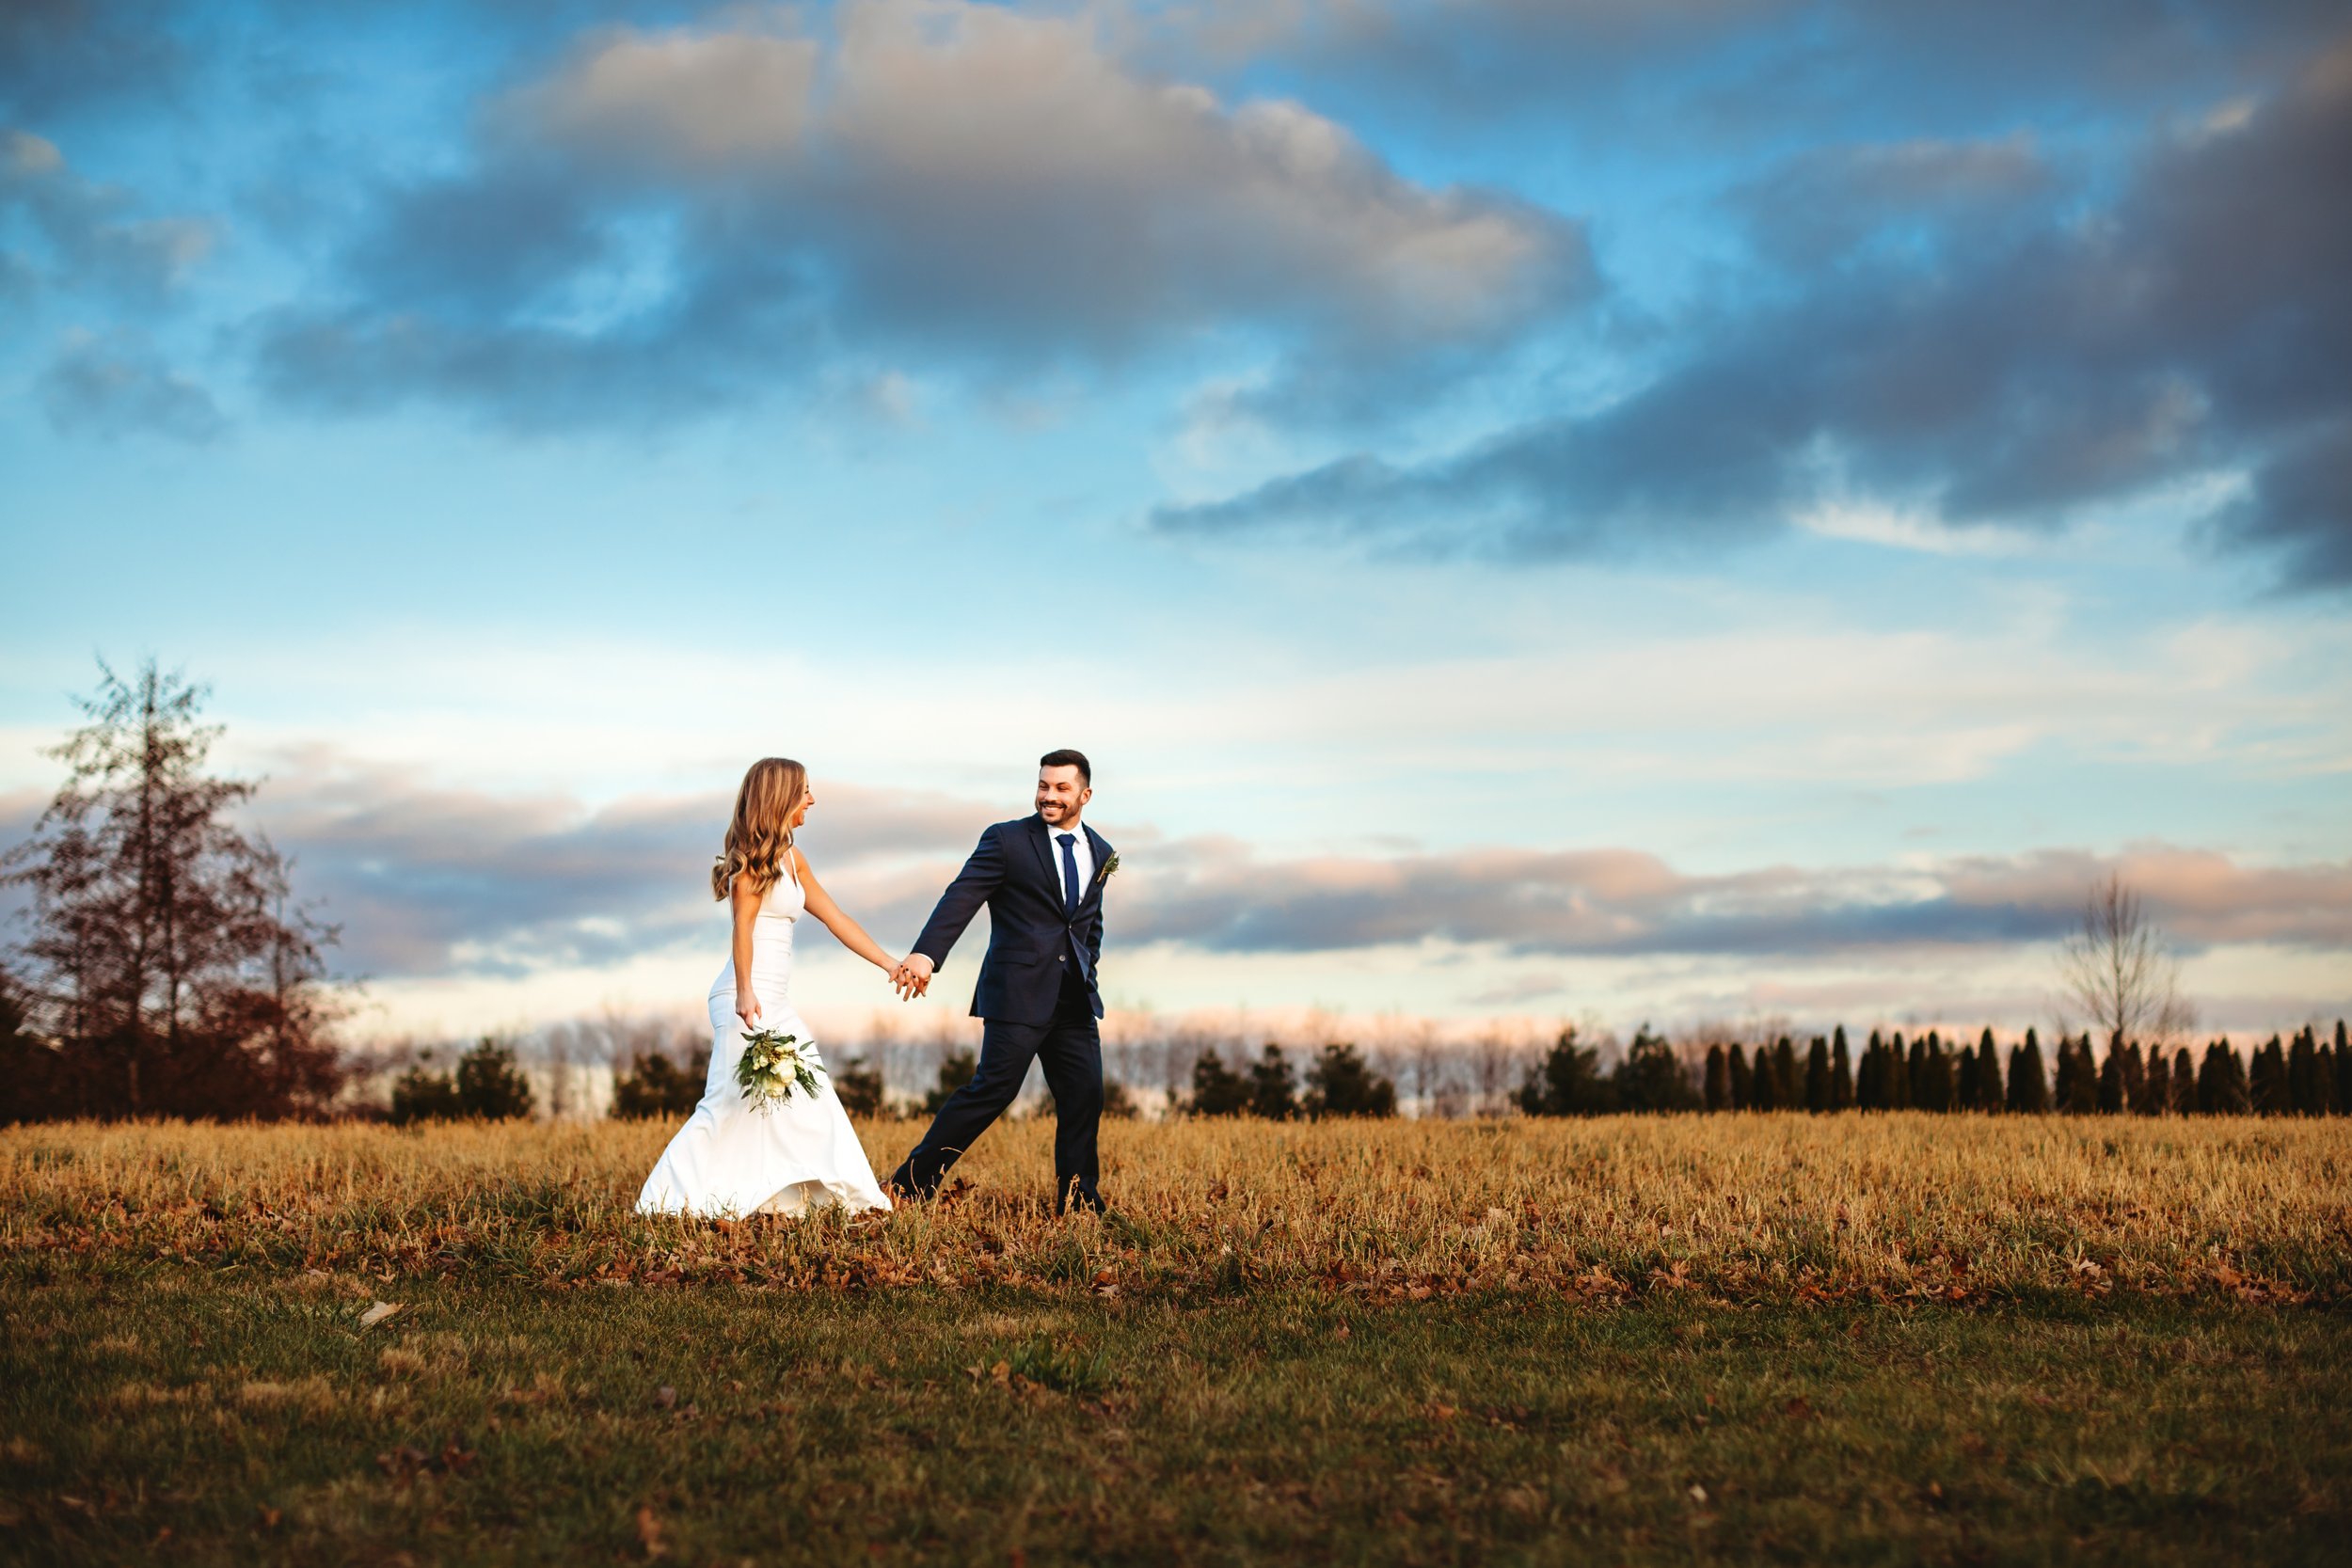  Outdoor portrait of a newlywed couple walking through a field in Illinois by Teala Ward Photography. wedding photography rich dynamic #tealawardphotography #tealawardweddings #LaSalleIllinois #IronwoodontheVermillion #weddingphotographyIL 